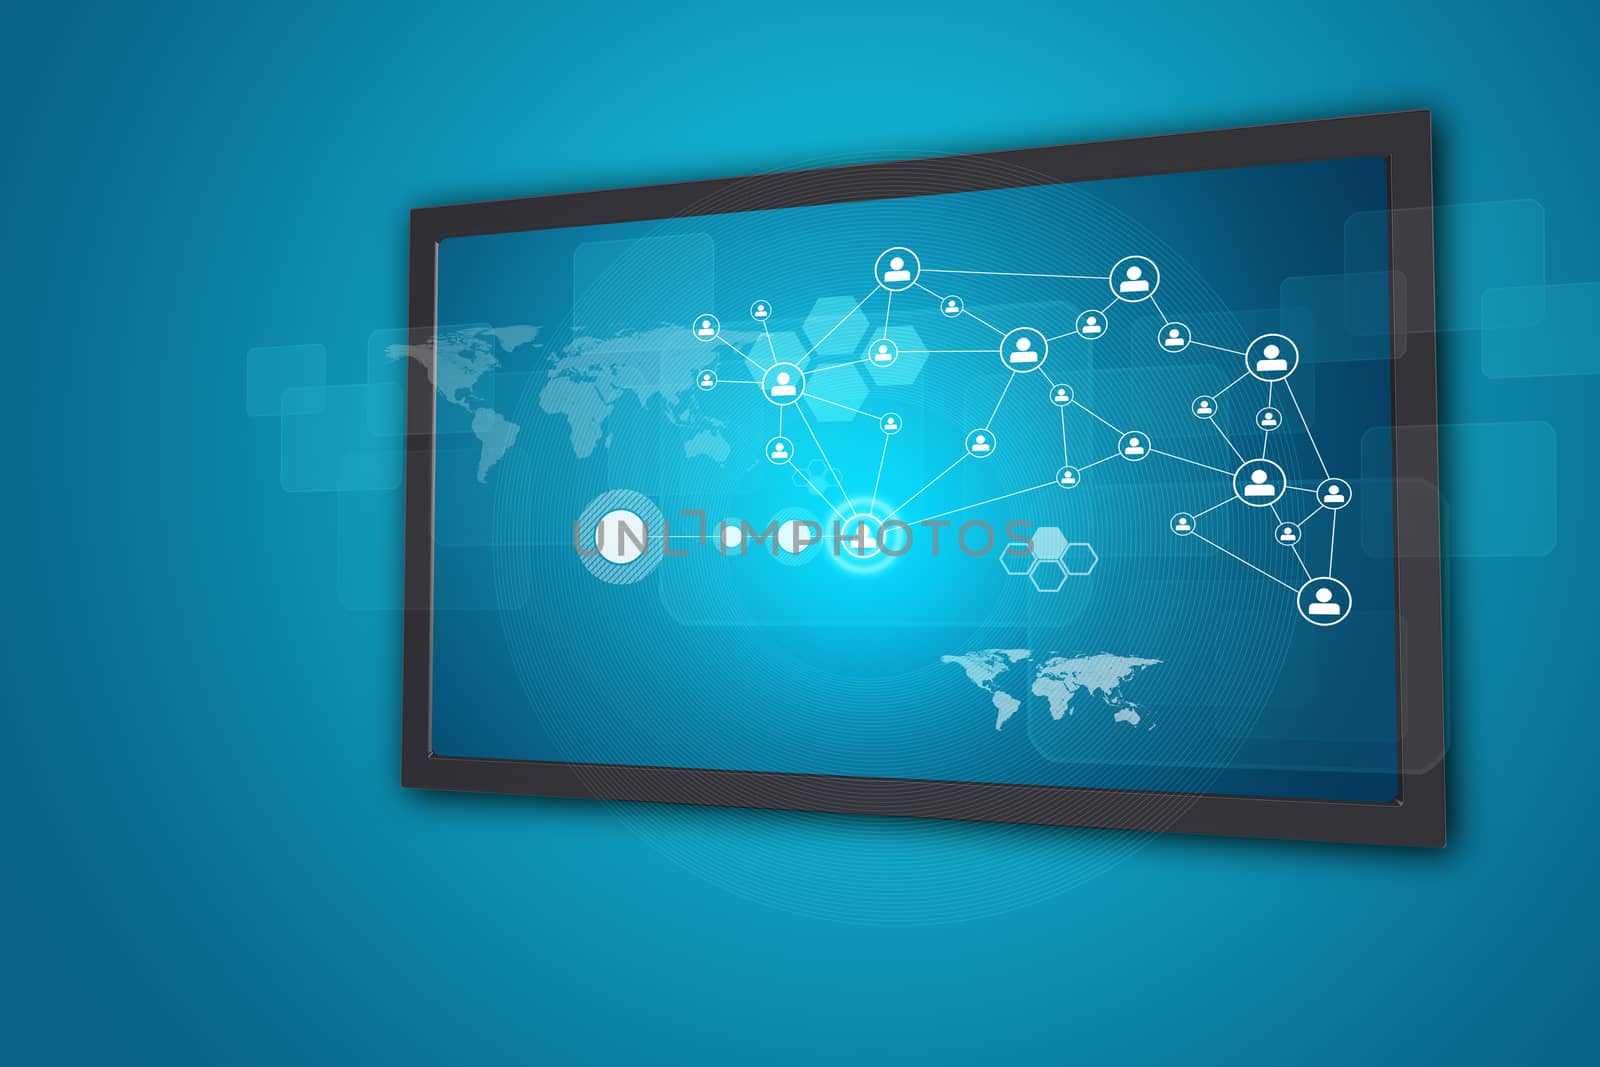 Touchscreen display with network of person icons and other elements, on blue background